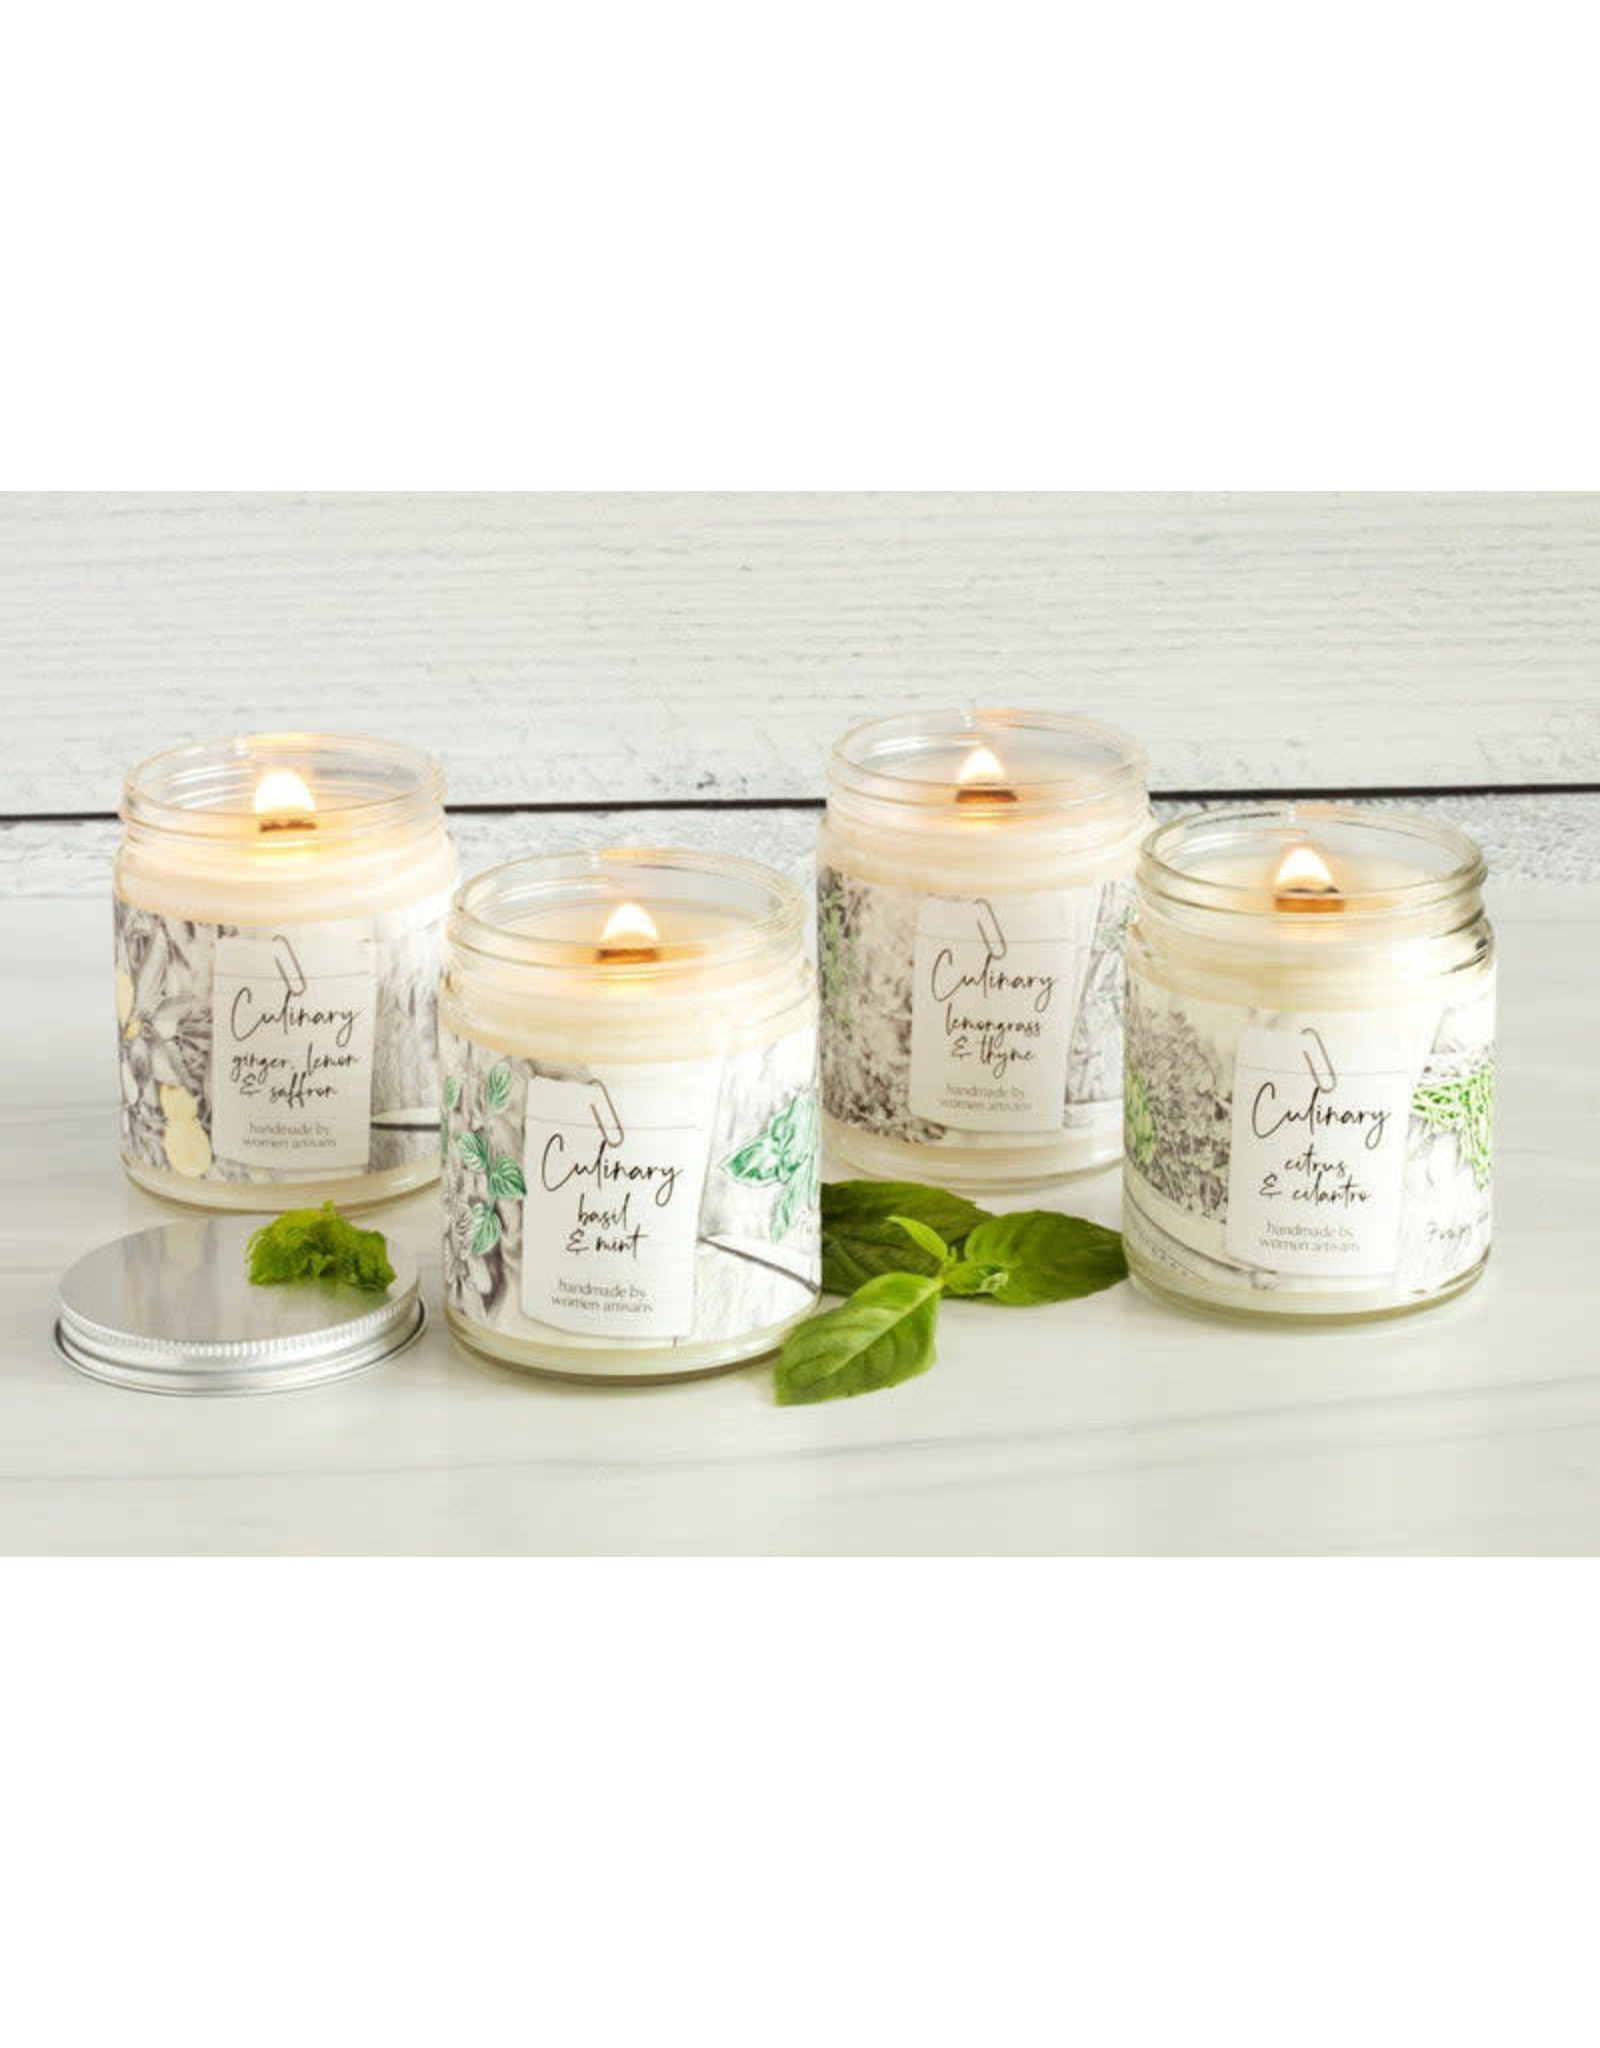 Trade roots Culinary Glass Soy Candles